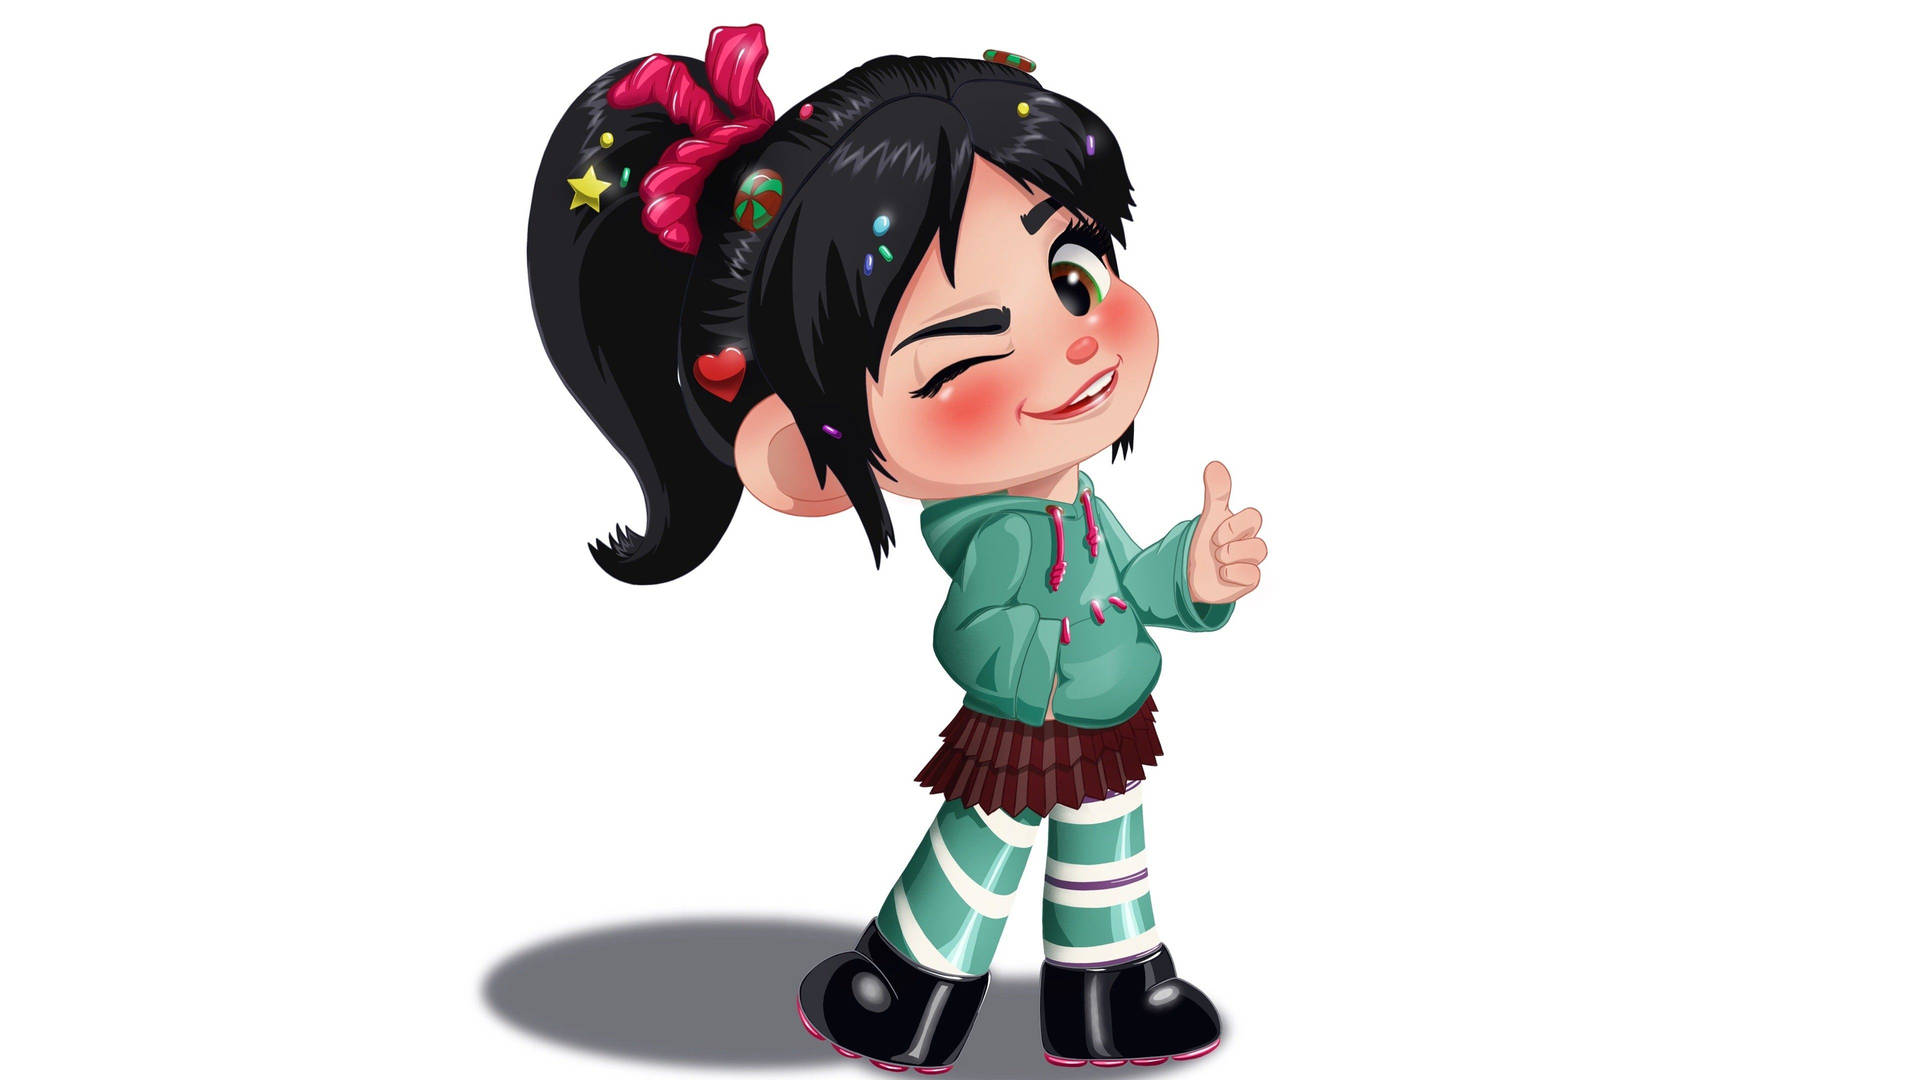 Wreck-it Ralph Vanellope Thumbs Up Background